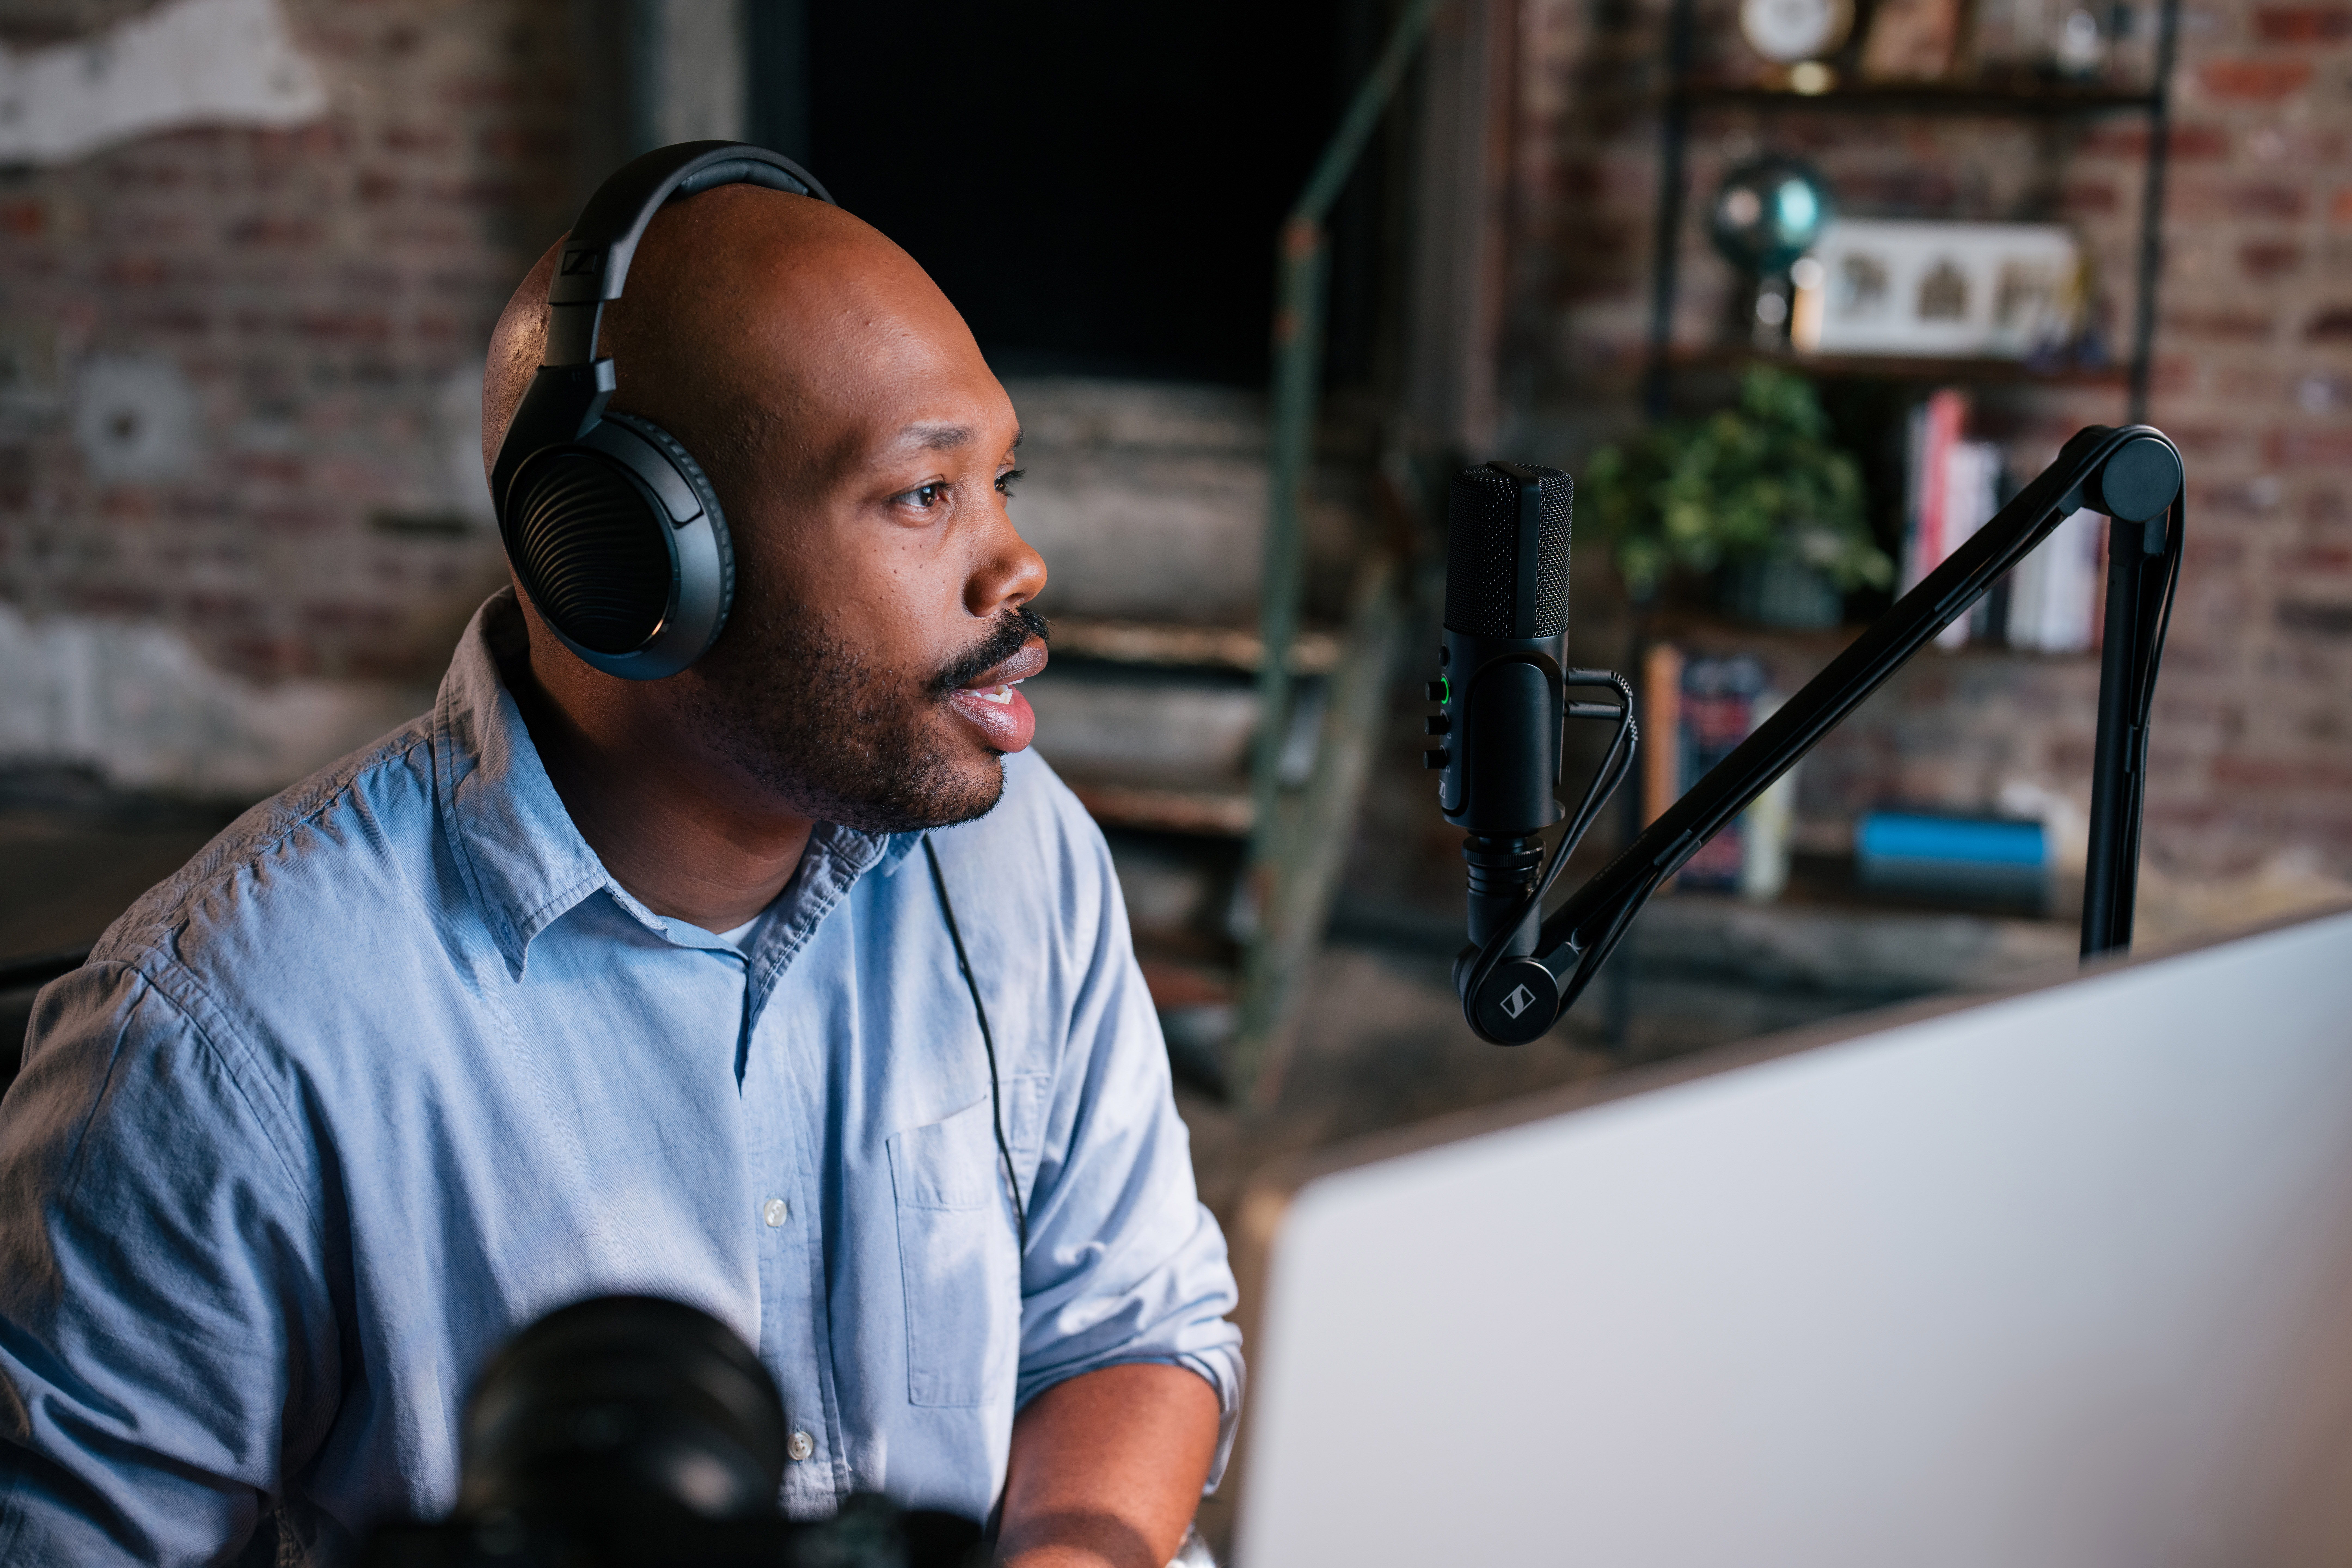 The Profile USB microphone has been designed with ease of use in mind – streamers and podcasters can fully focus on their content